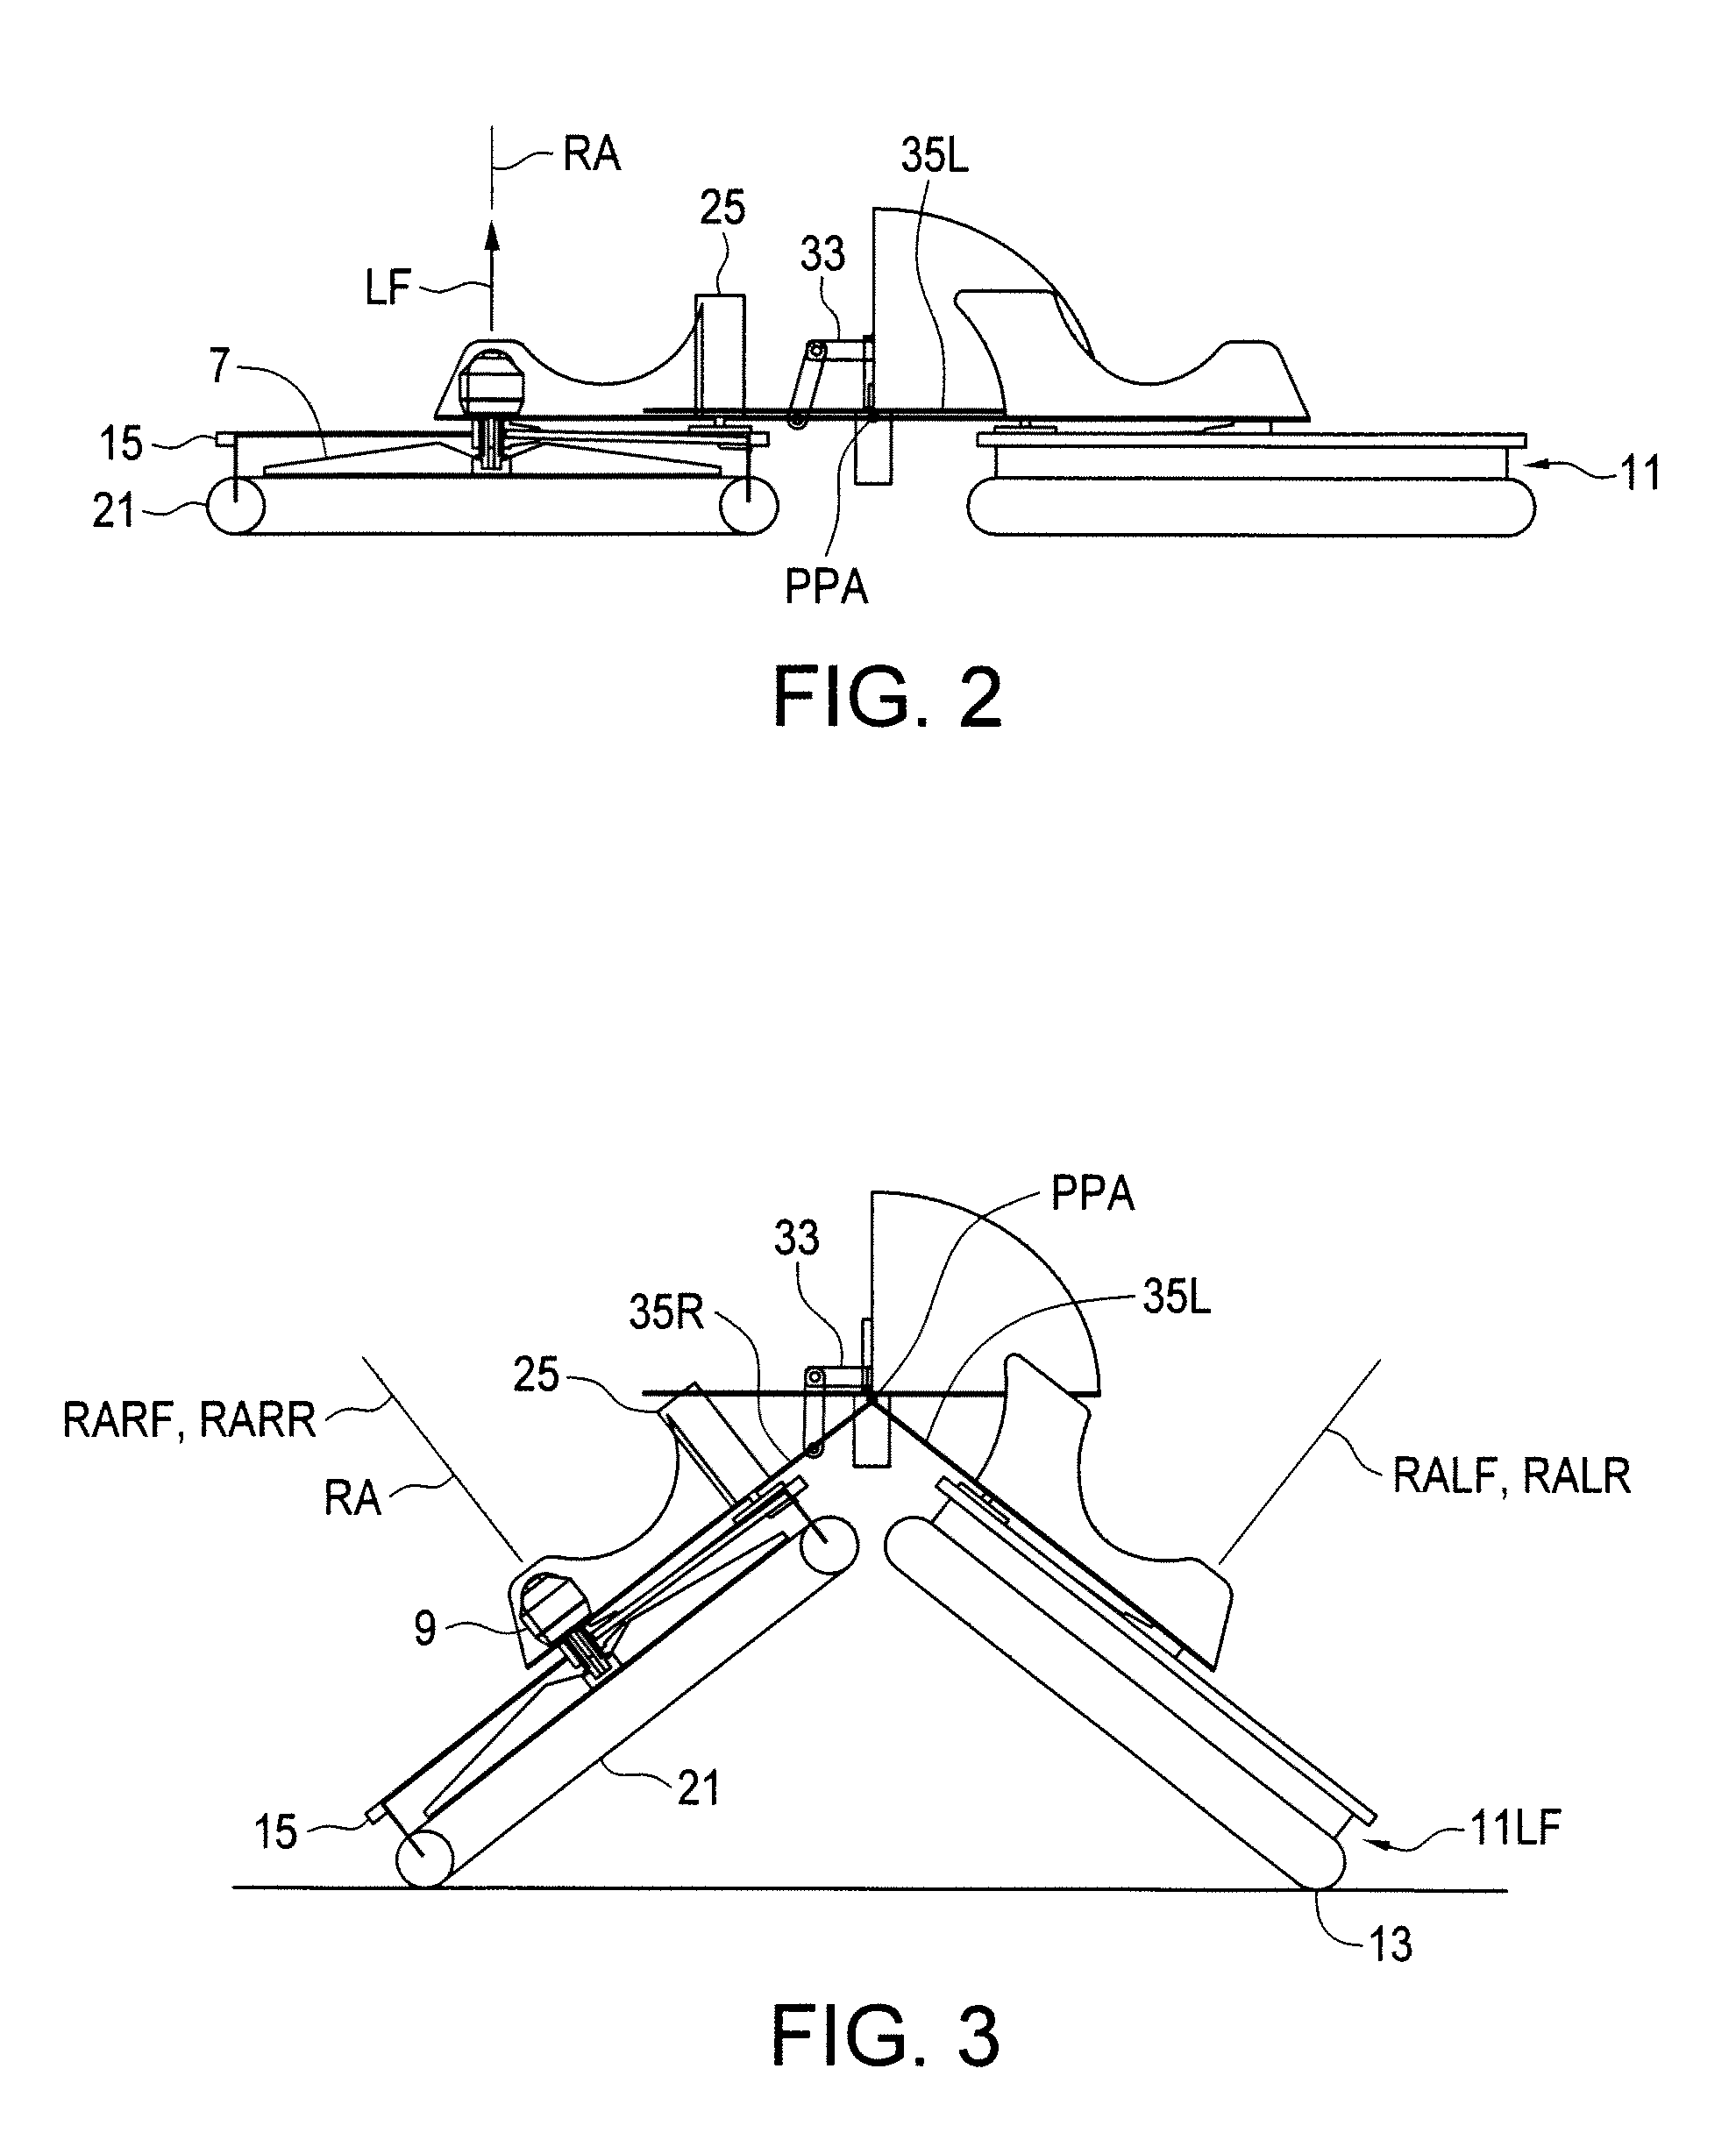 Vehicle with aerial and ground mobility